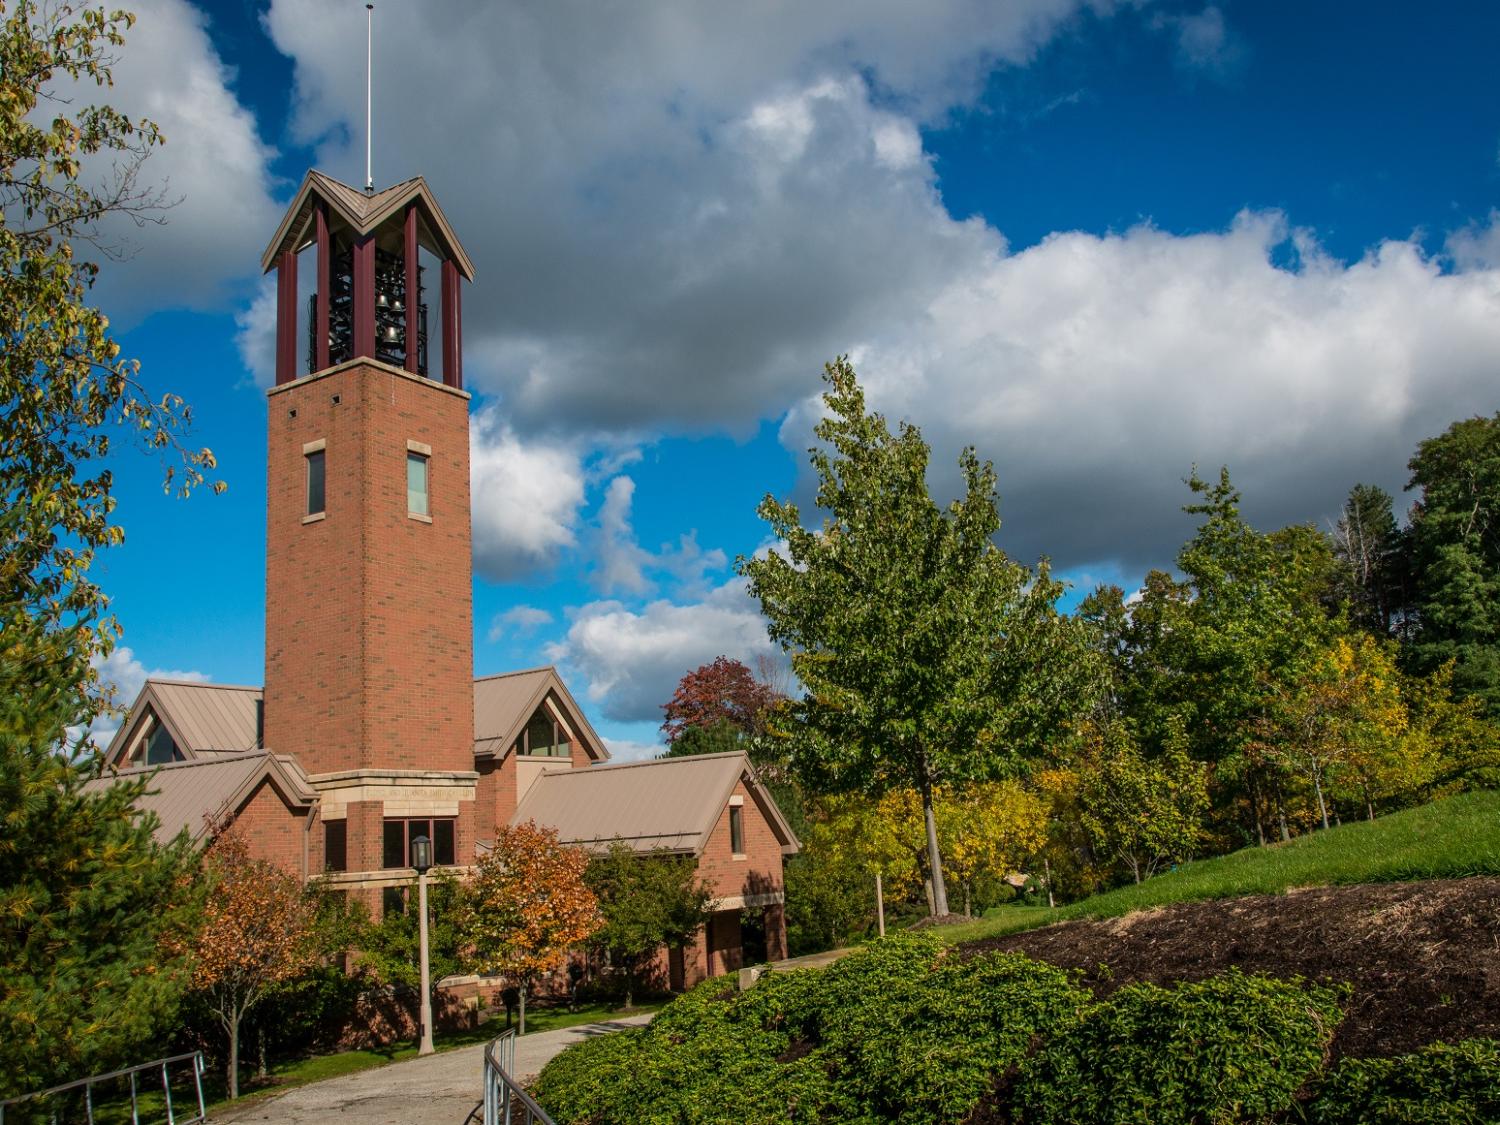 The Smith Chapel at Penn State Behrend